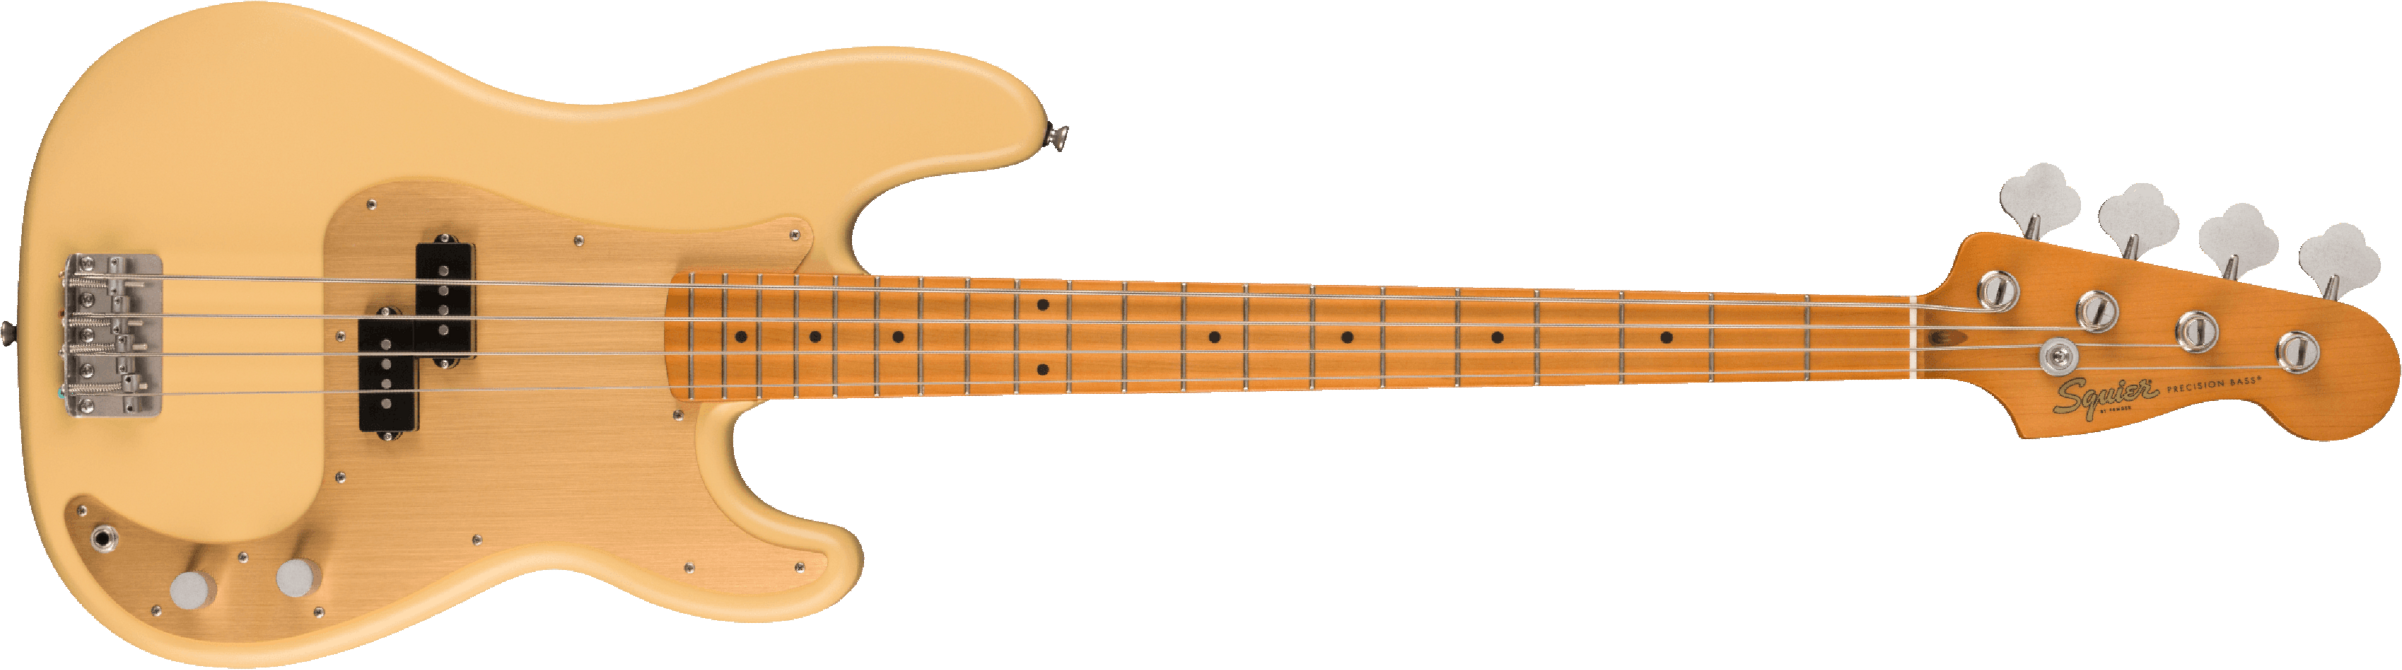 Squier Precision Bass 40th Anniversary Gold Edition Mn - Satin Vintage Blonde - Solid body electric bass - Main picture